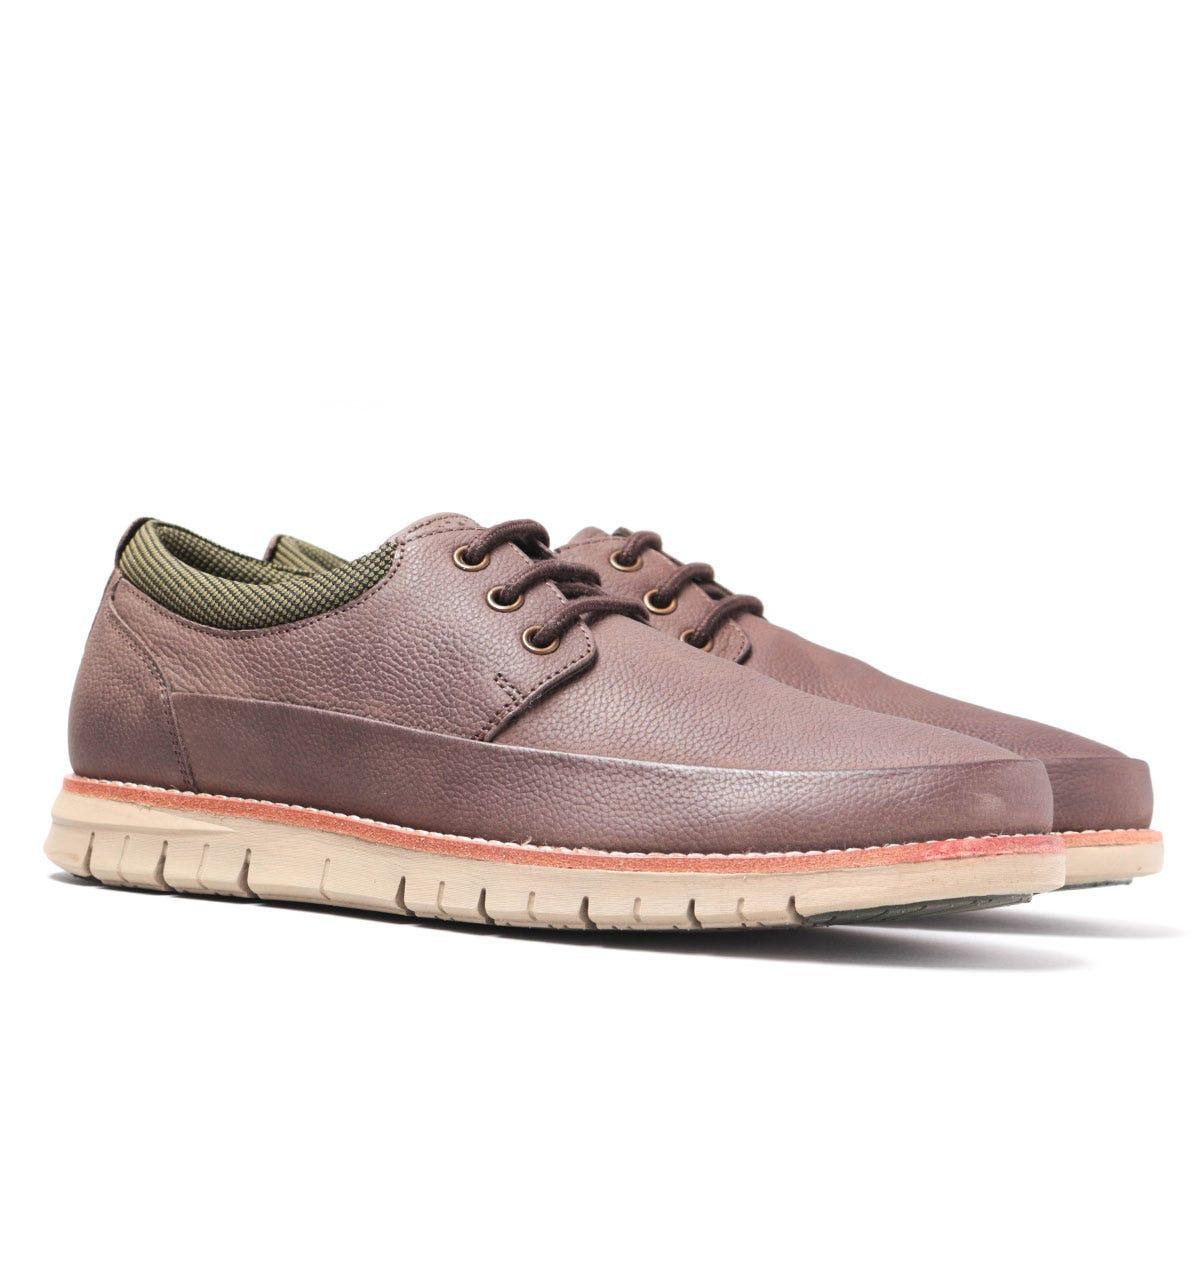 Barbour Barbour Horatio Brown Leather Shoes for Men | Lyst